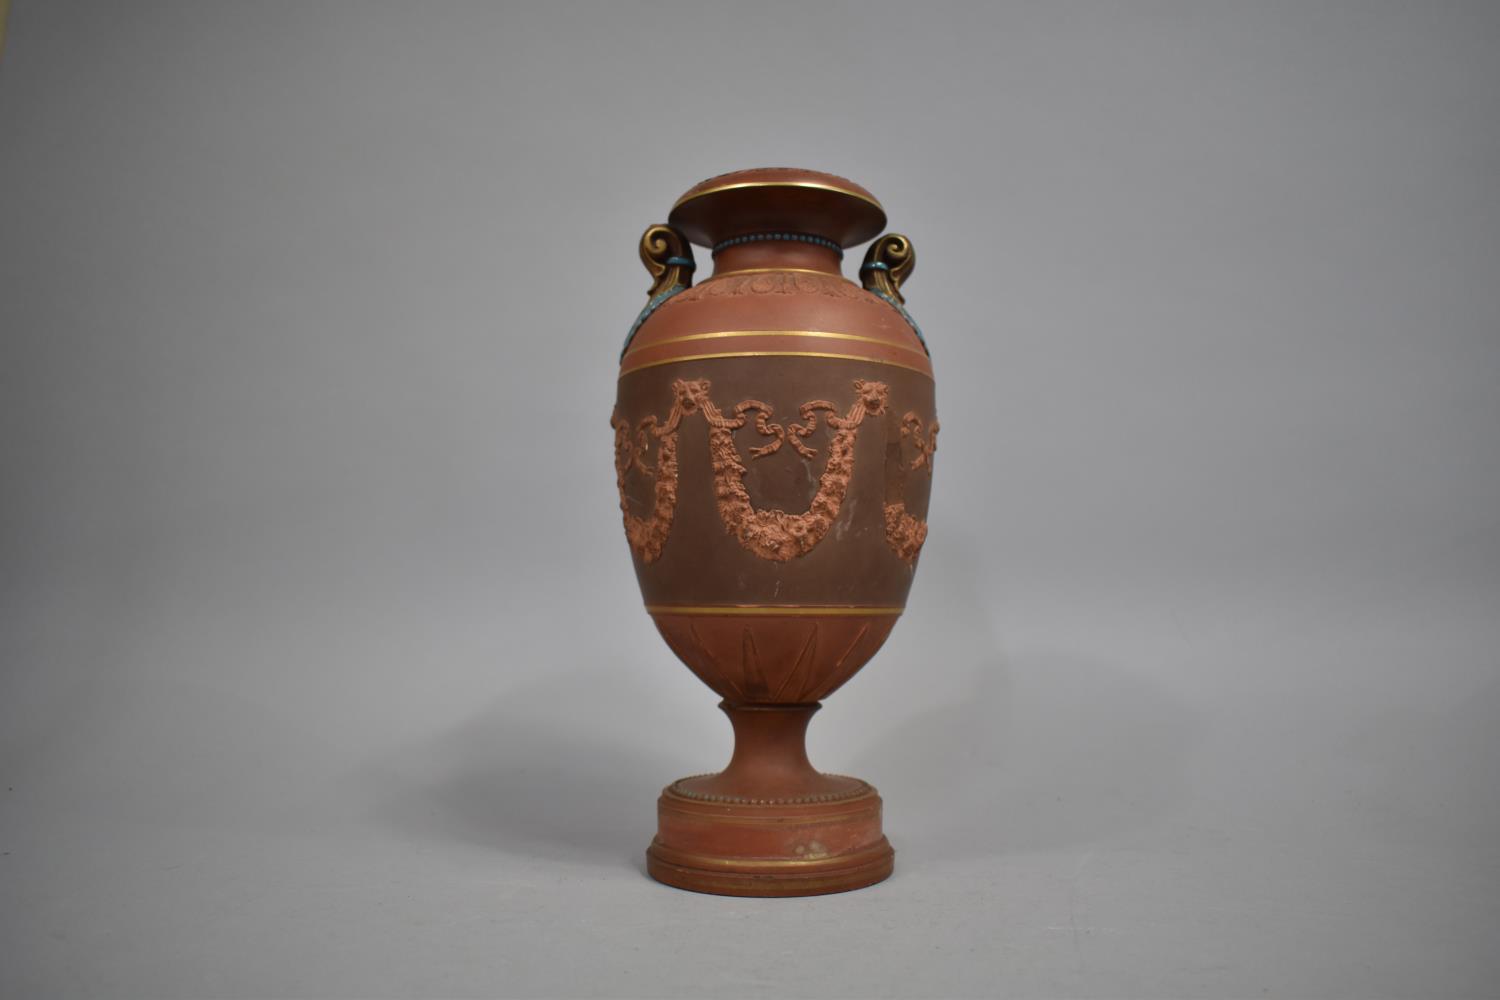 A Late 19th/20th Century Terracotta Two handled Vase with Floral Swag Decoration, Condition Issues